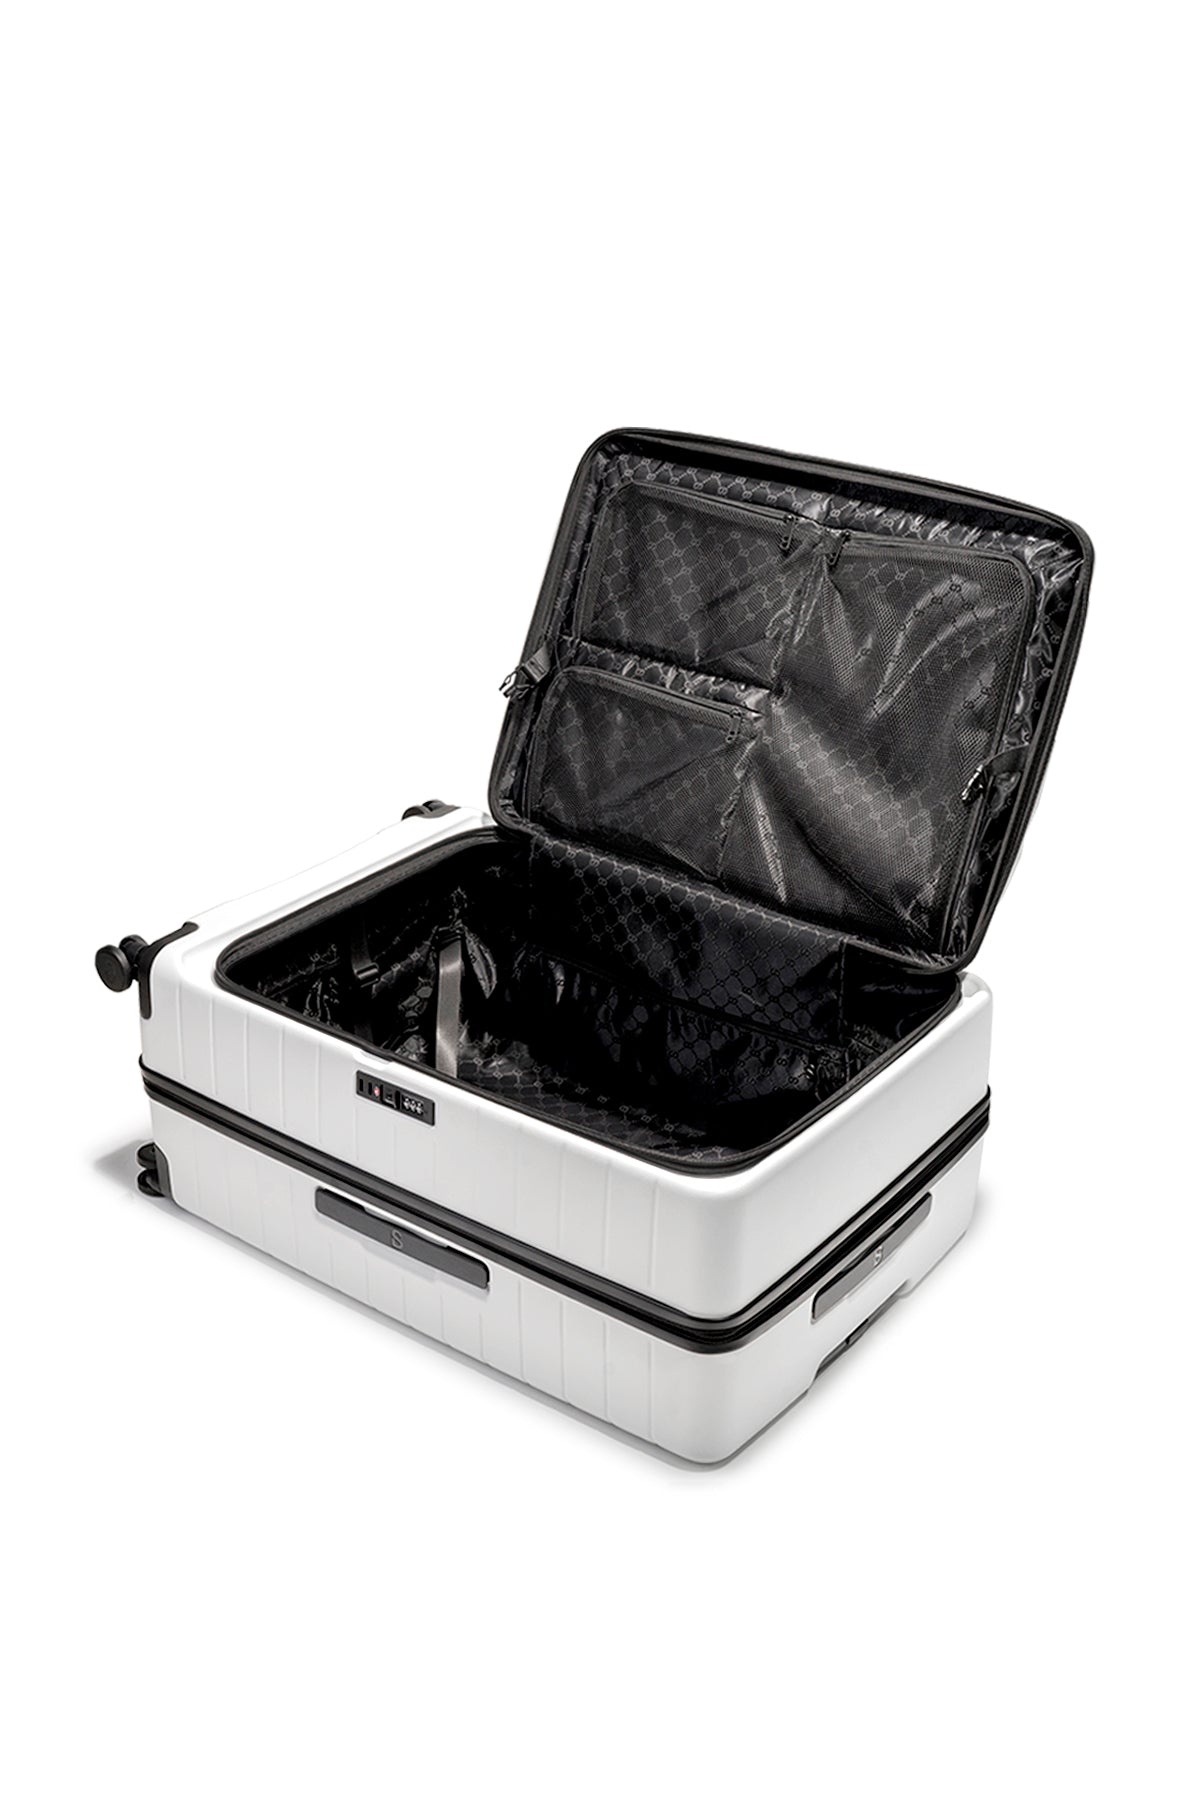 Check-in Luggage 26"" - White